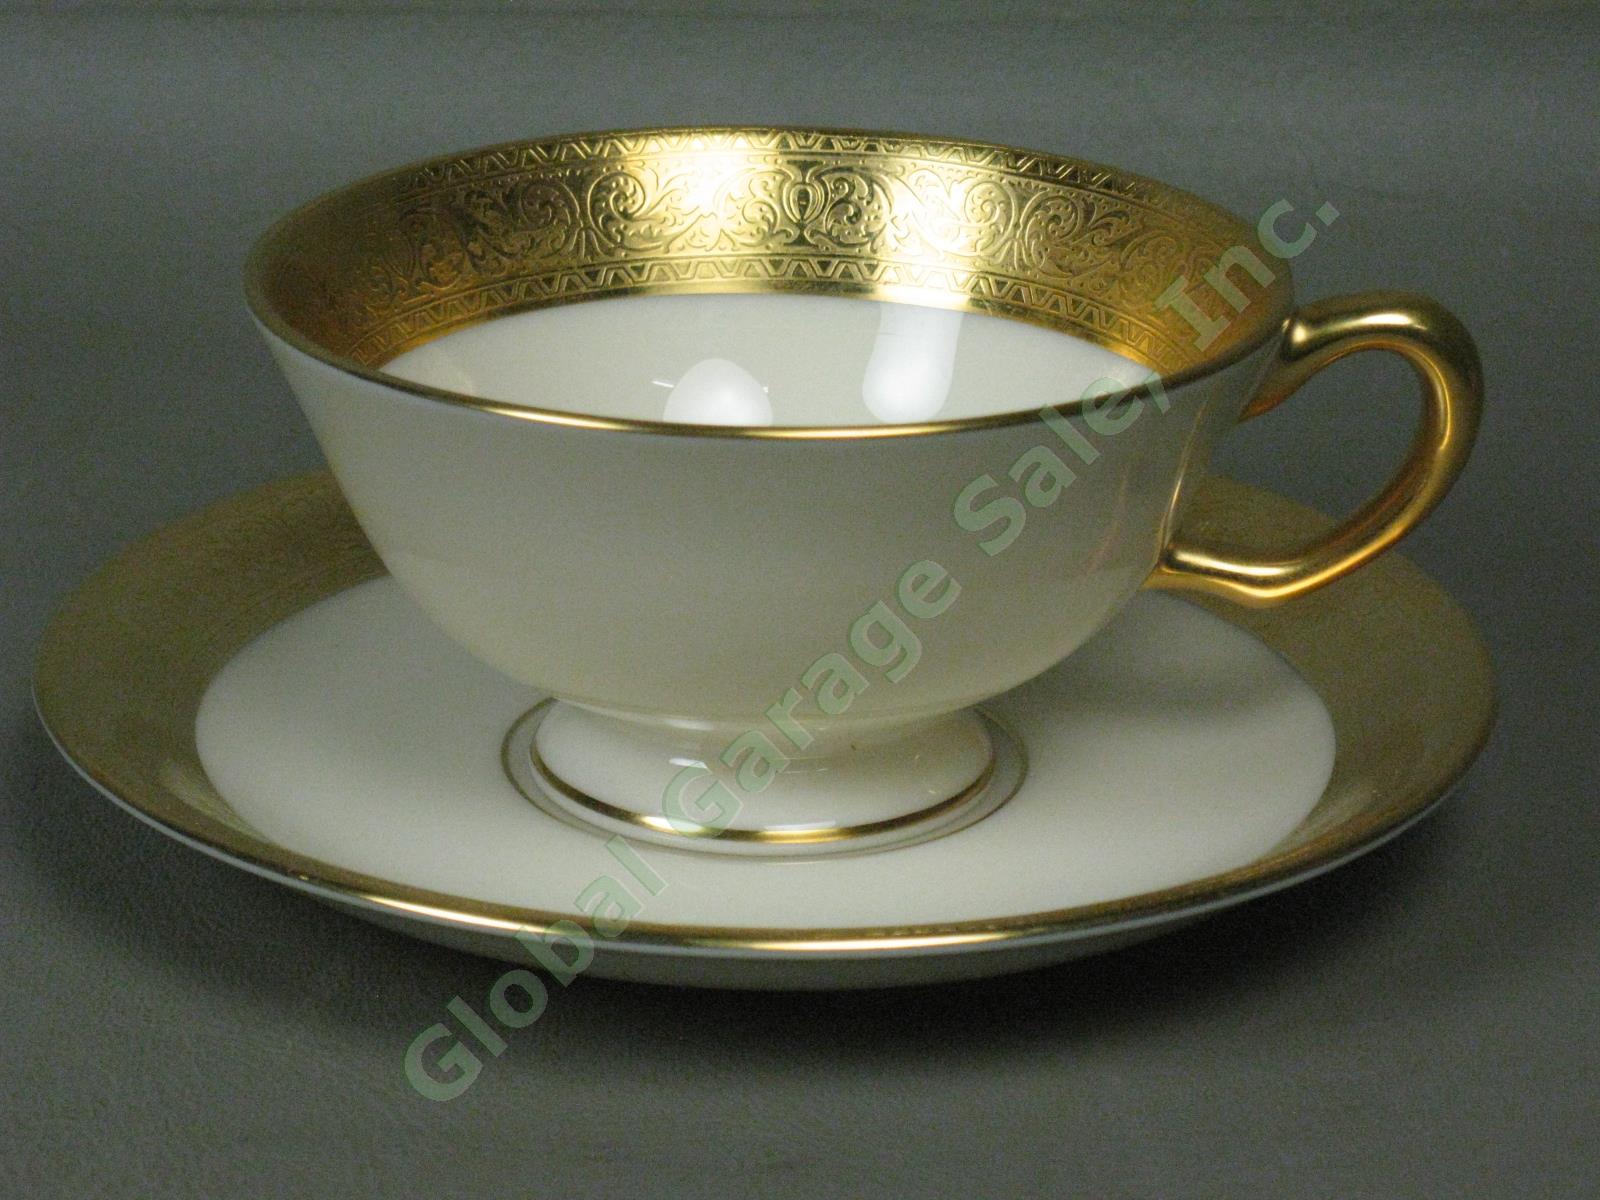 4 Lenox Westchester China M139 Presidential Gold Encrusted Tea Cup Saucer Set NR 1